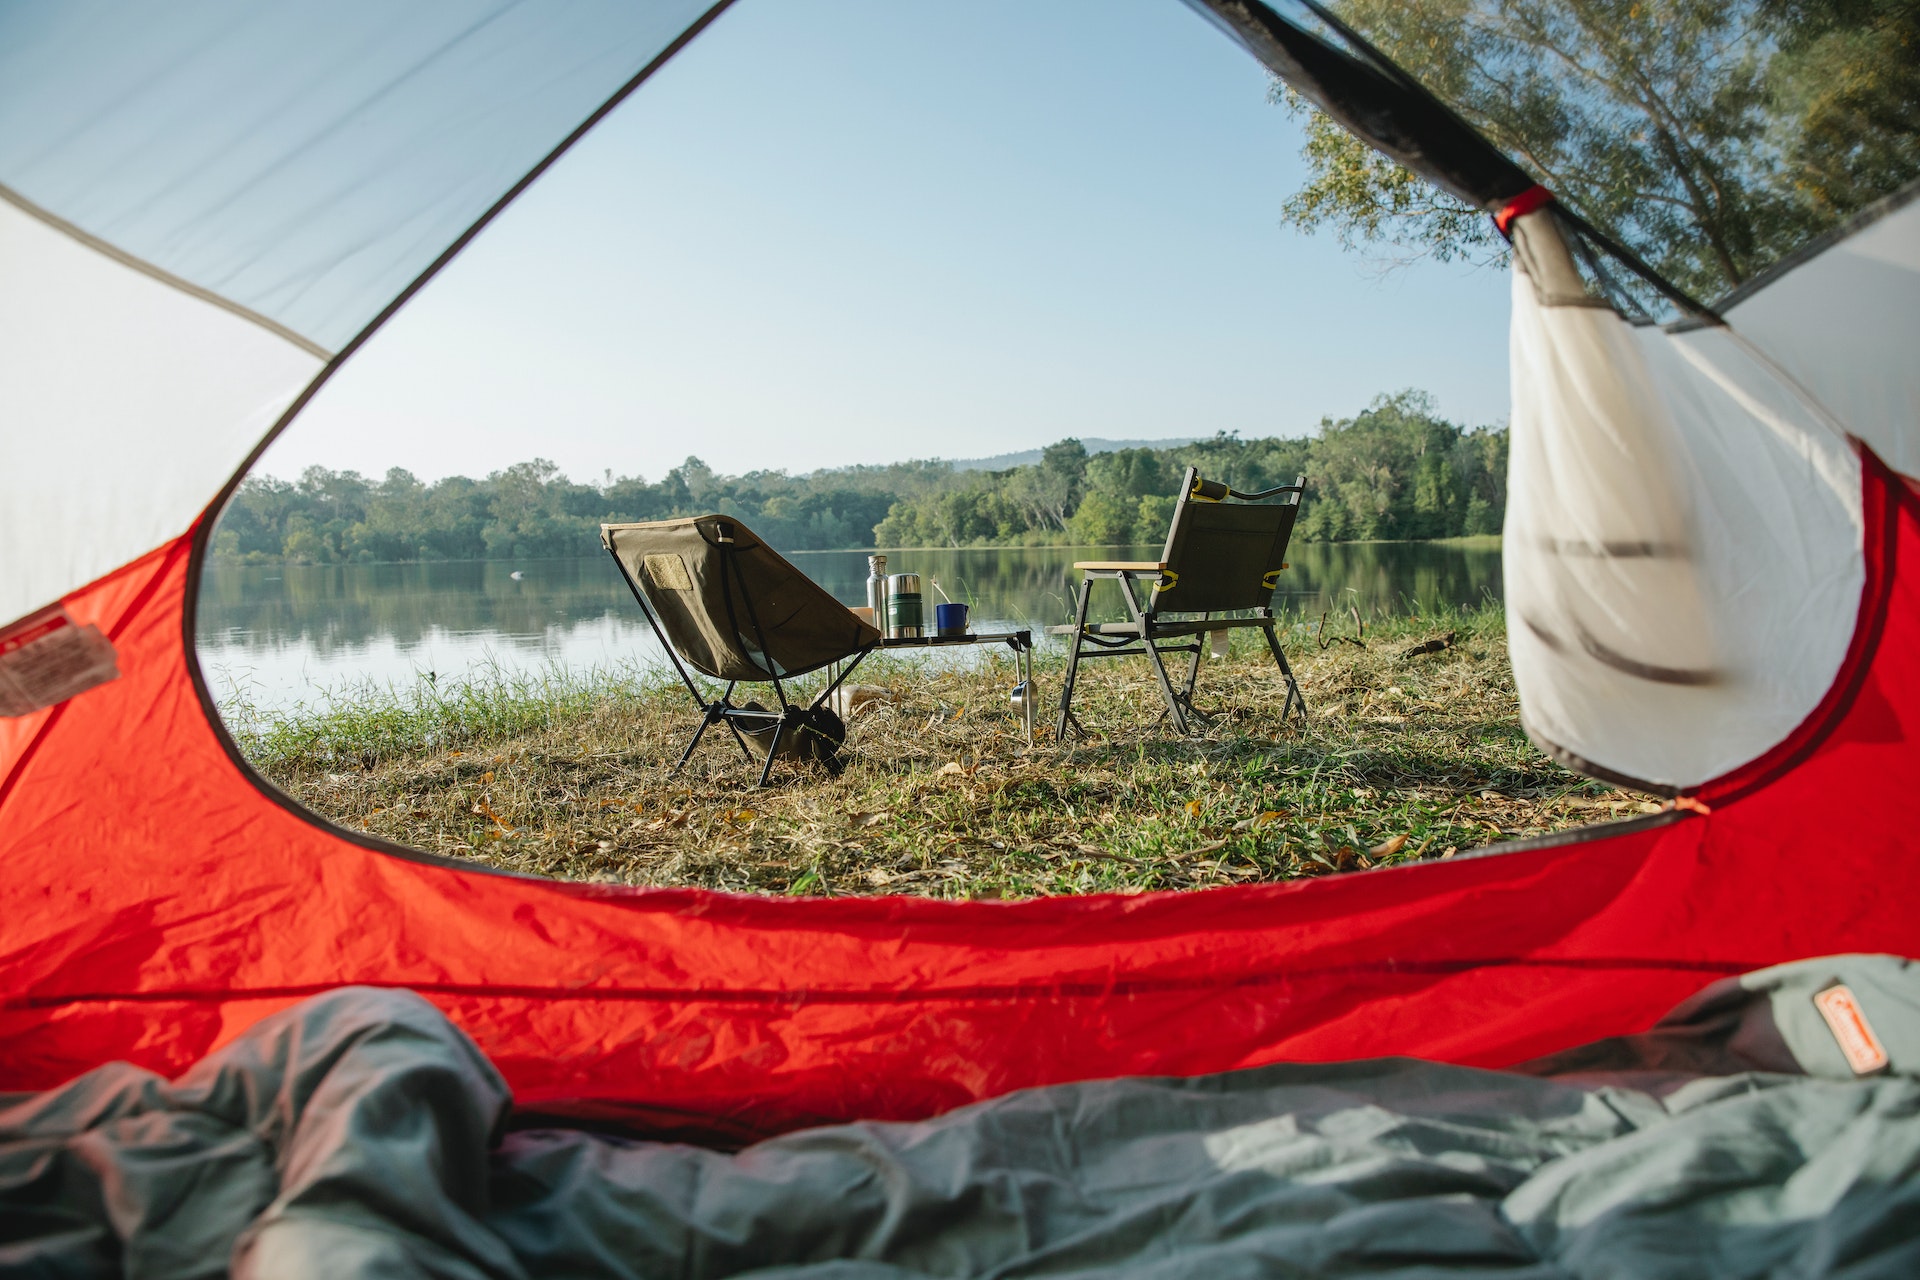 Build your perfect camping sleep system to stay dry and cool - The